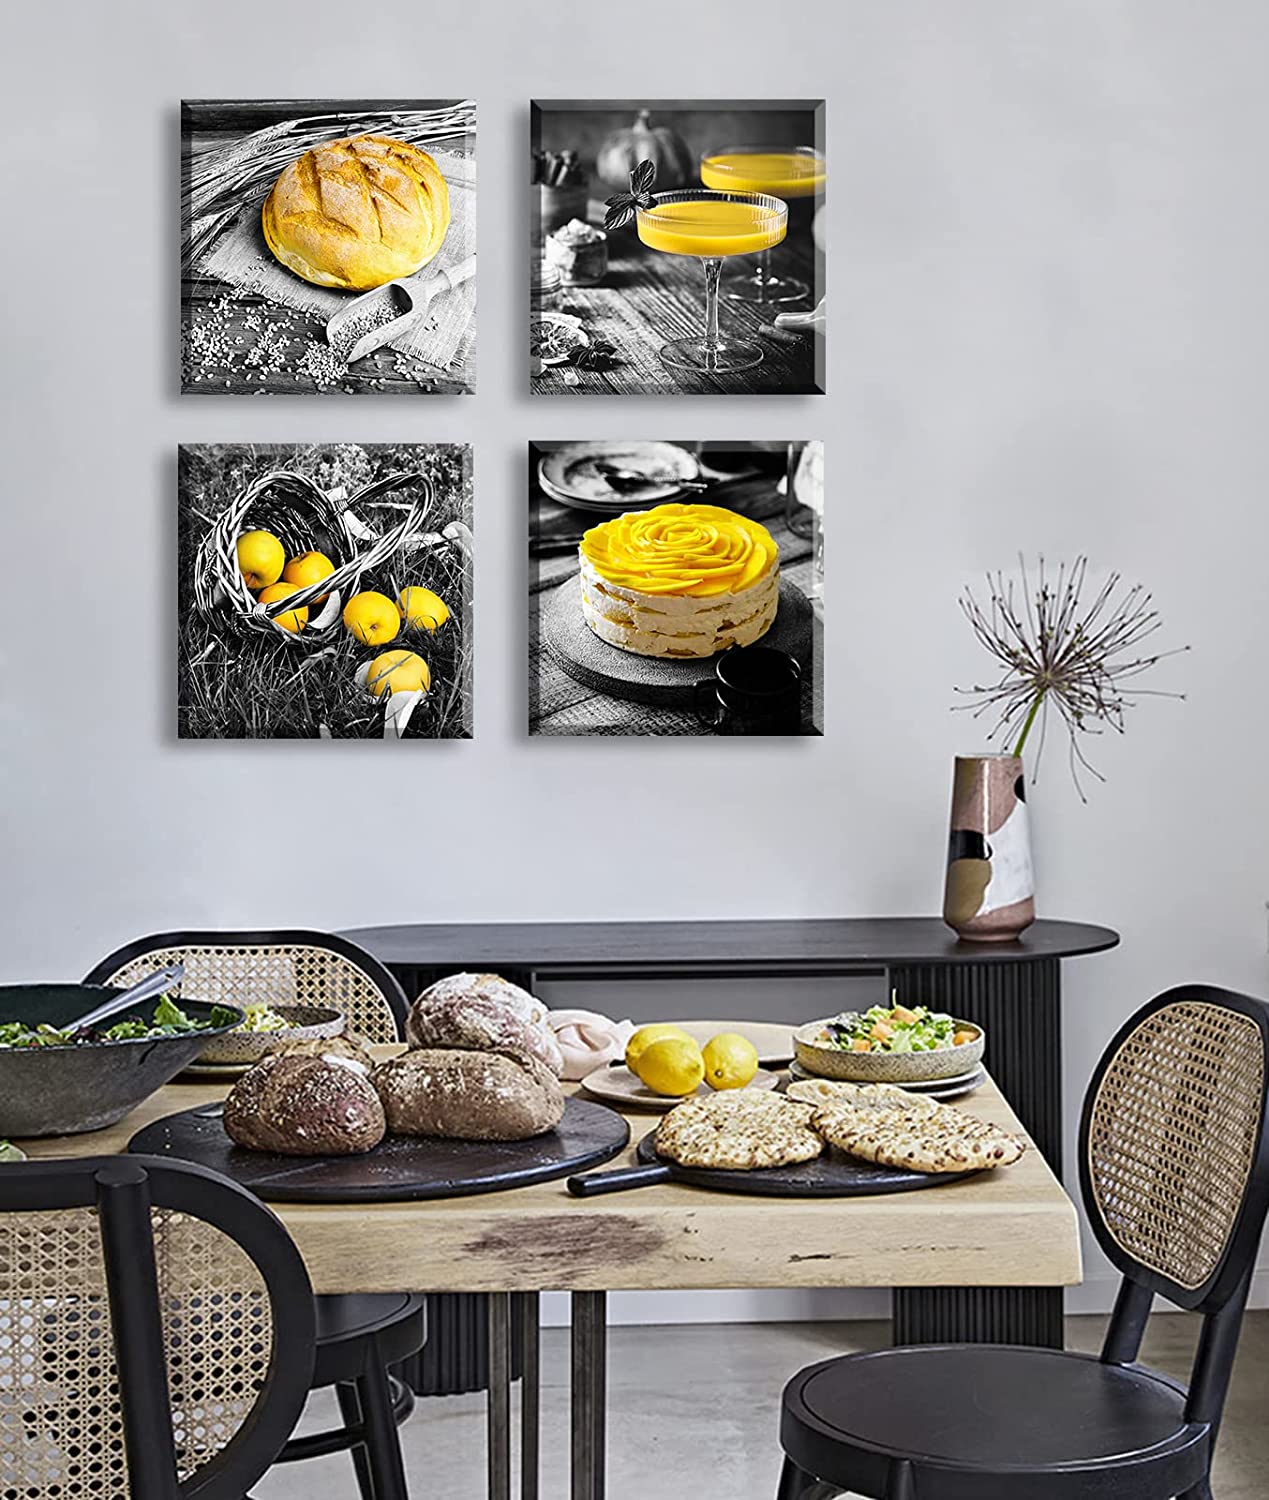 Kitchen Wall Decor Black and White Yellow Wall Art Bread Cake Fruit Picture Canvas  Print Paintings for Cafe Dining Room Restaurant Farmhouse Kitchen Decoration  12